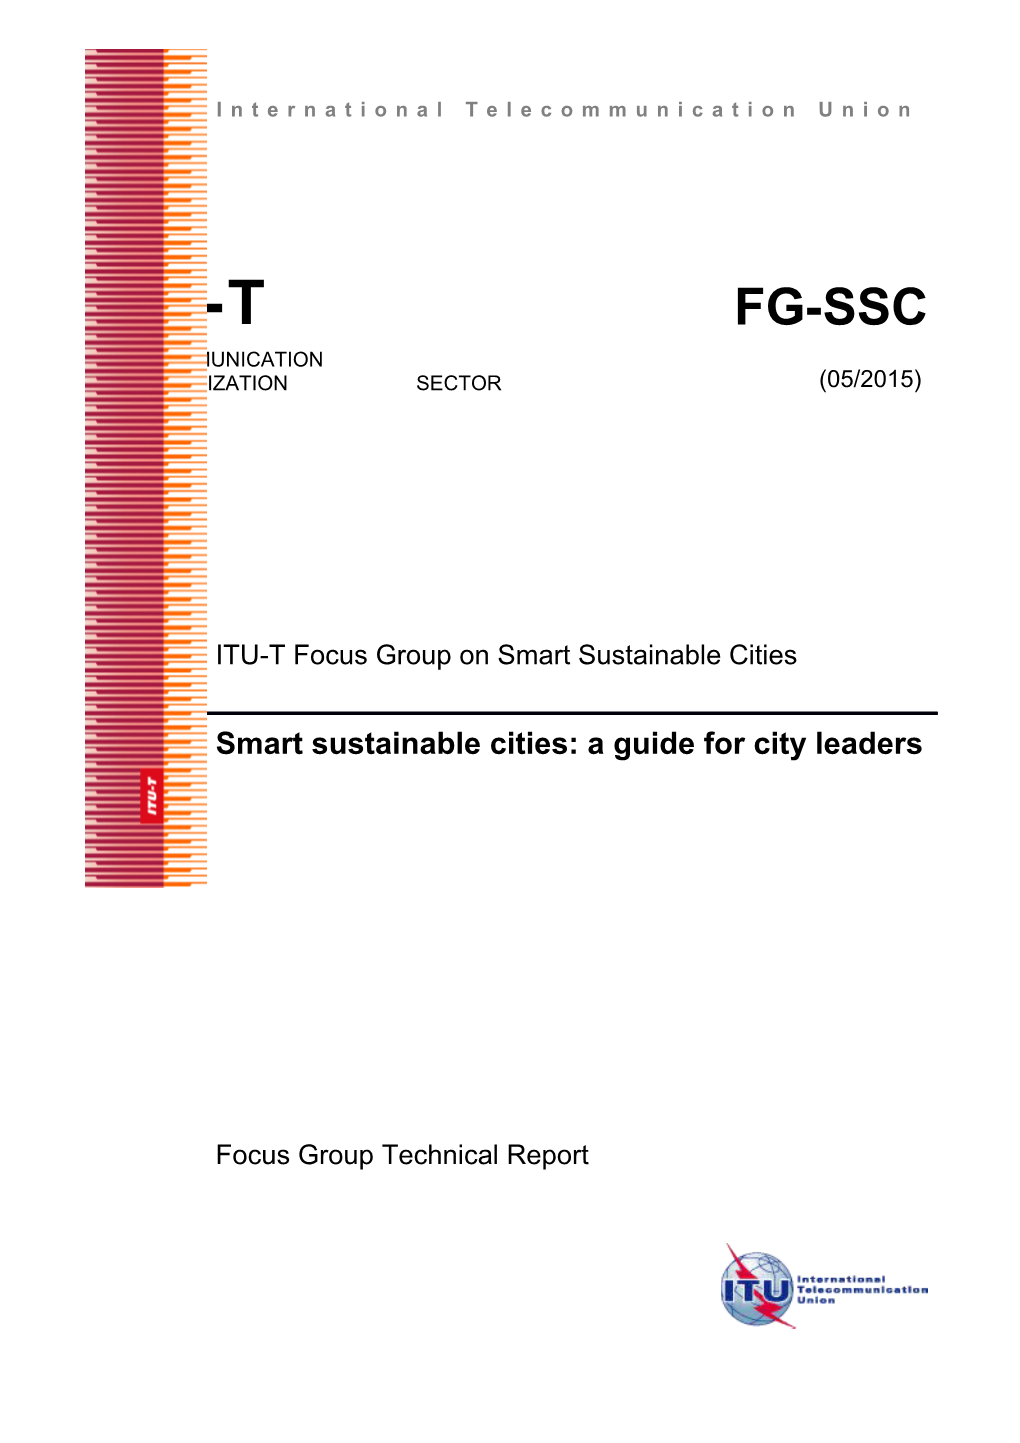 Smart Sustainable Cities: a Guide for City Leaders